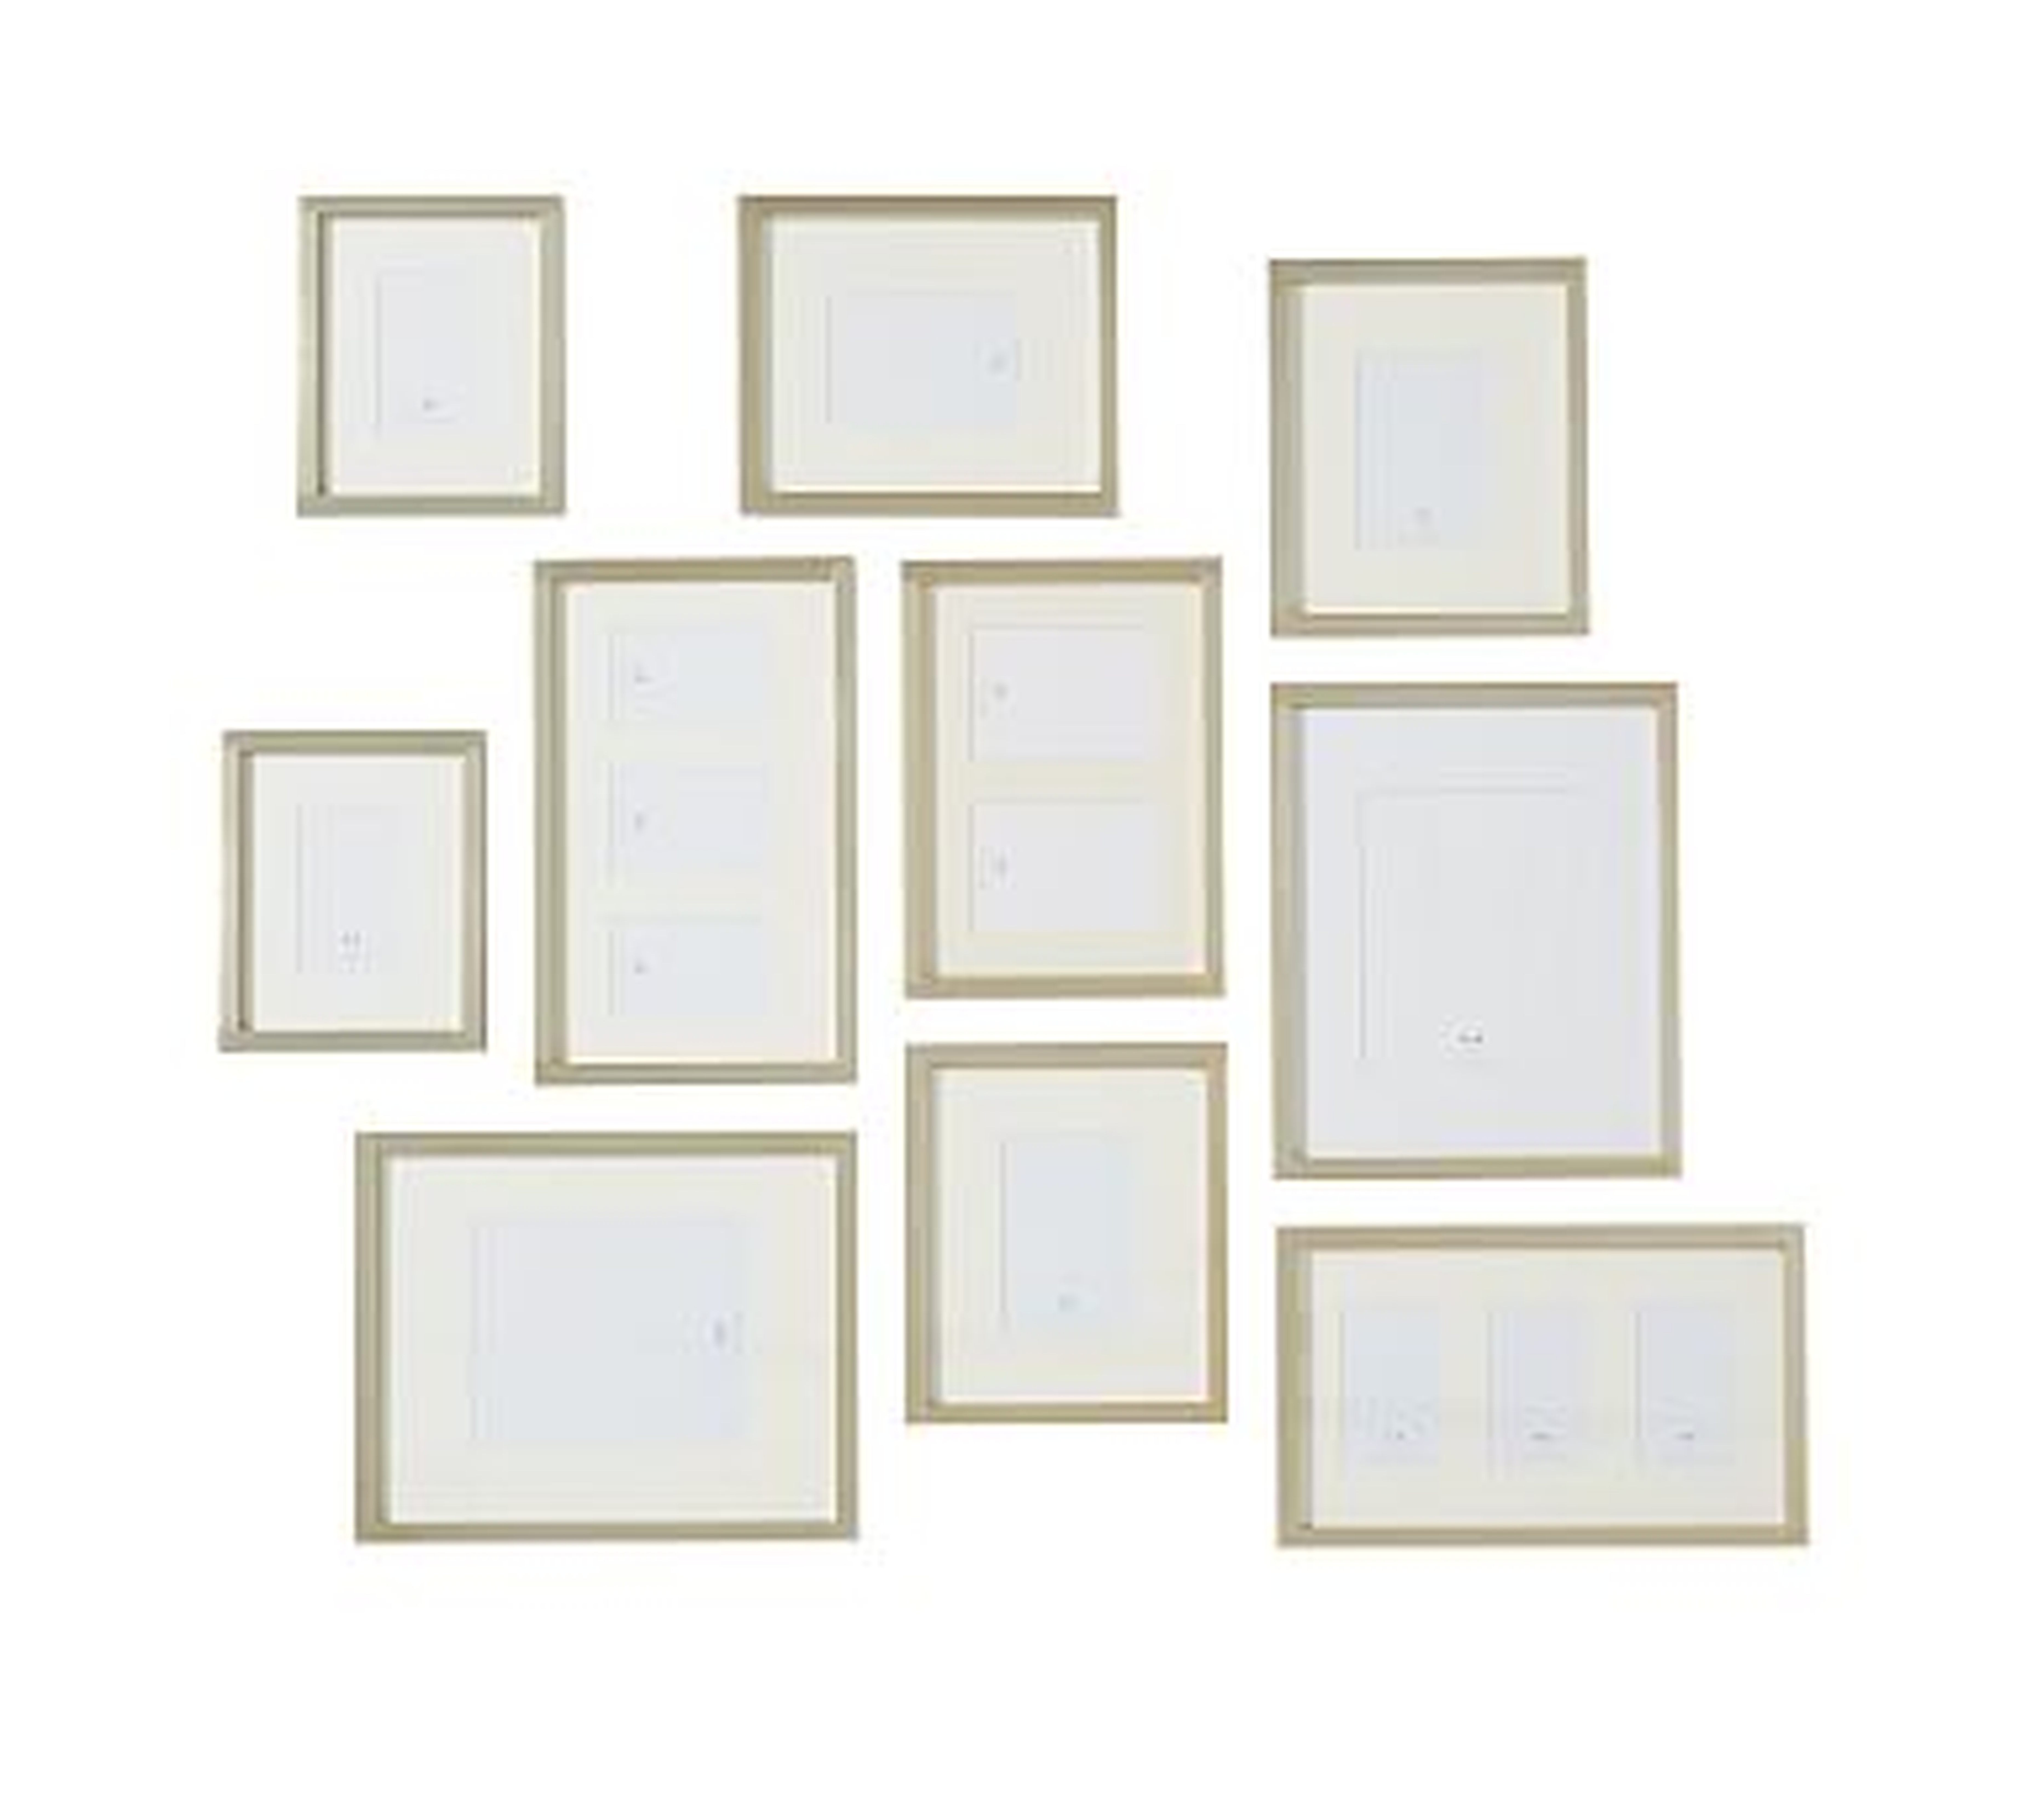 Champagne Gilt Photo Frame Gallery in a Box, Set of 10 - Pottery Barn